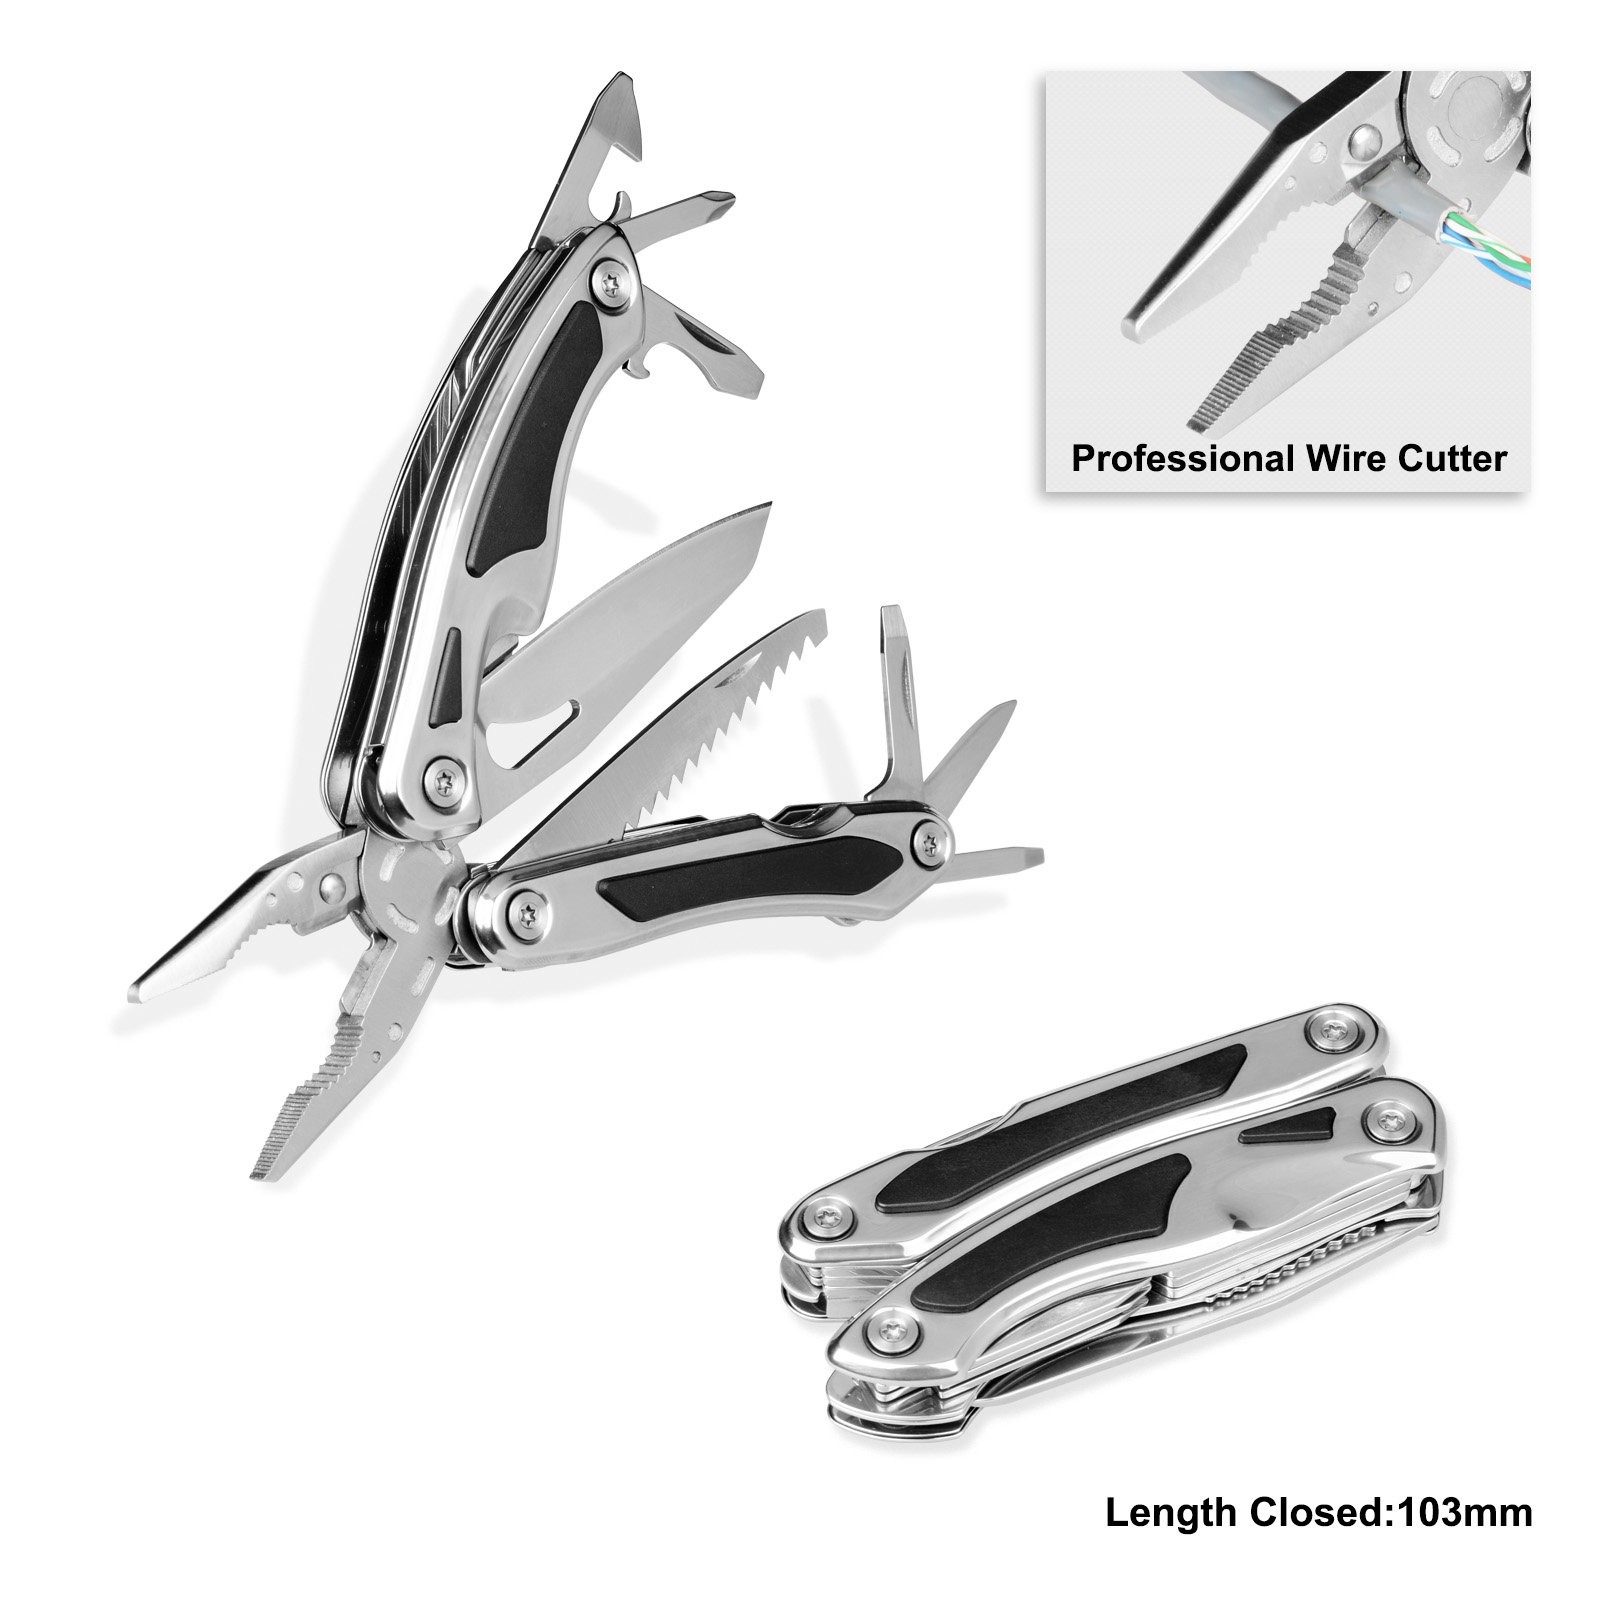 #8299 Top Quality Multitools with Stainless Steel + Rubber Handle